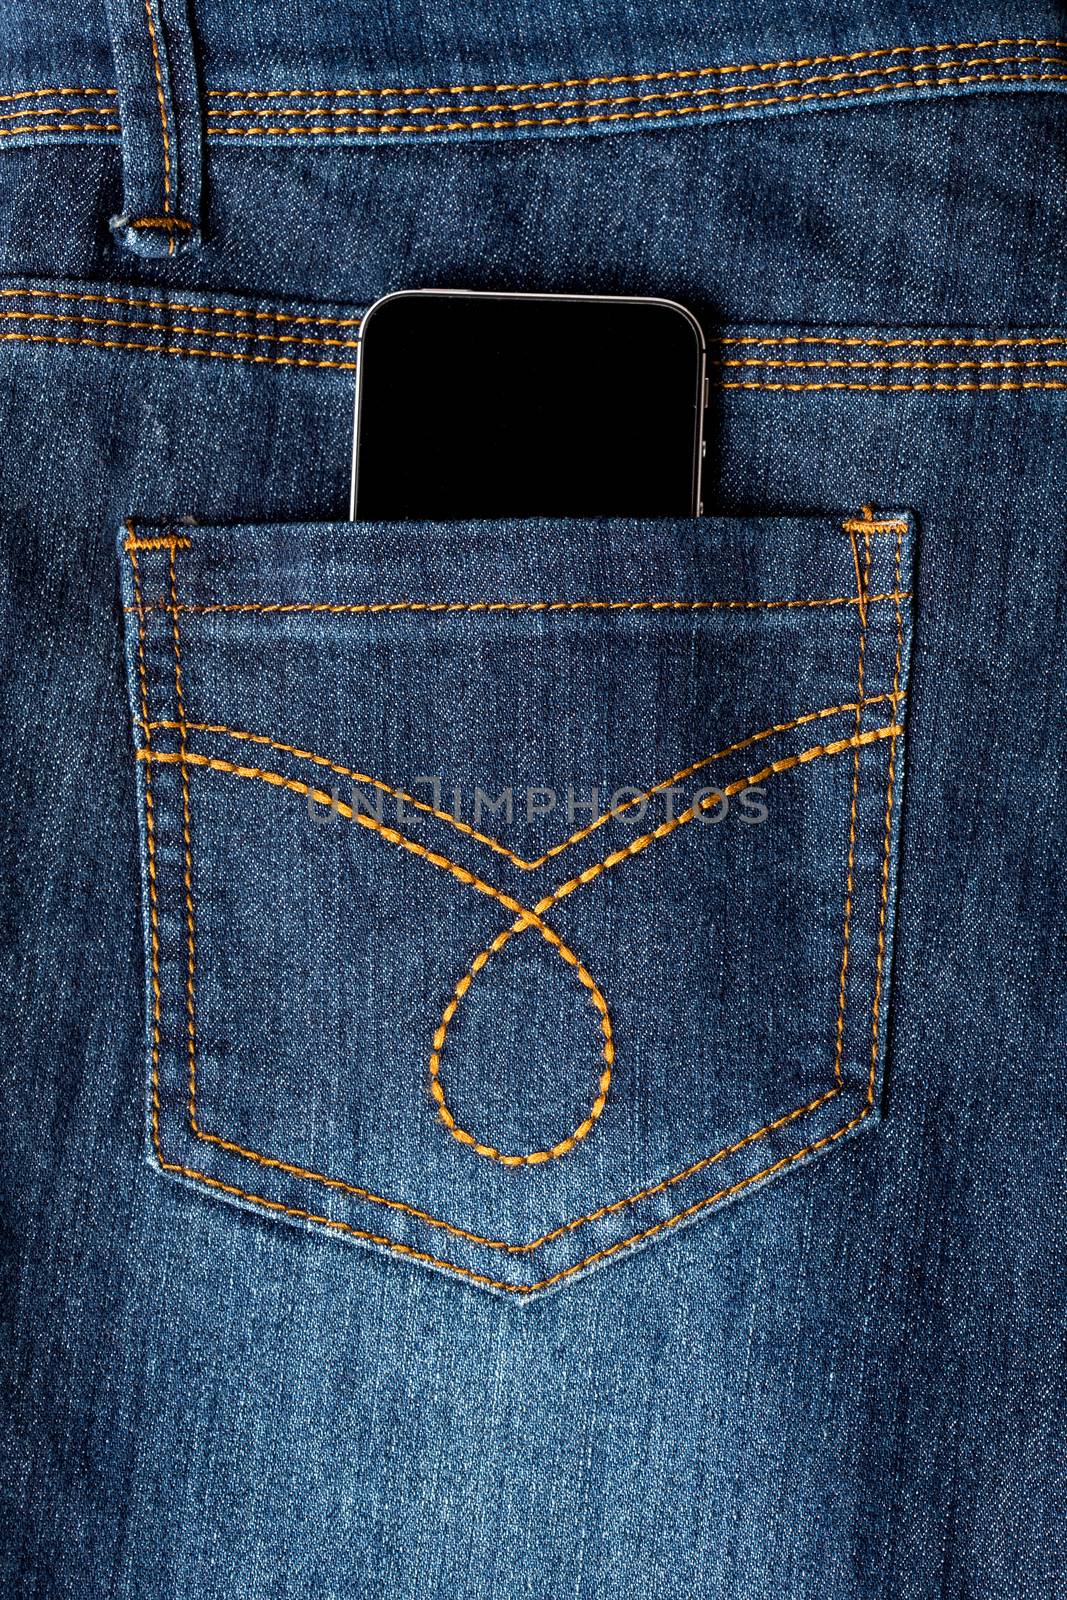 Cellphone in jeans pocket by stockyimages